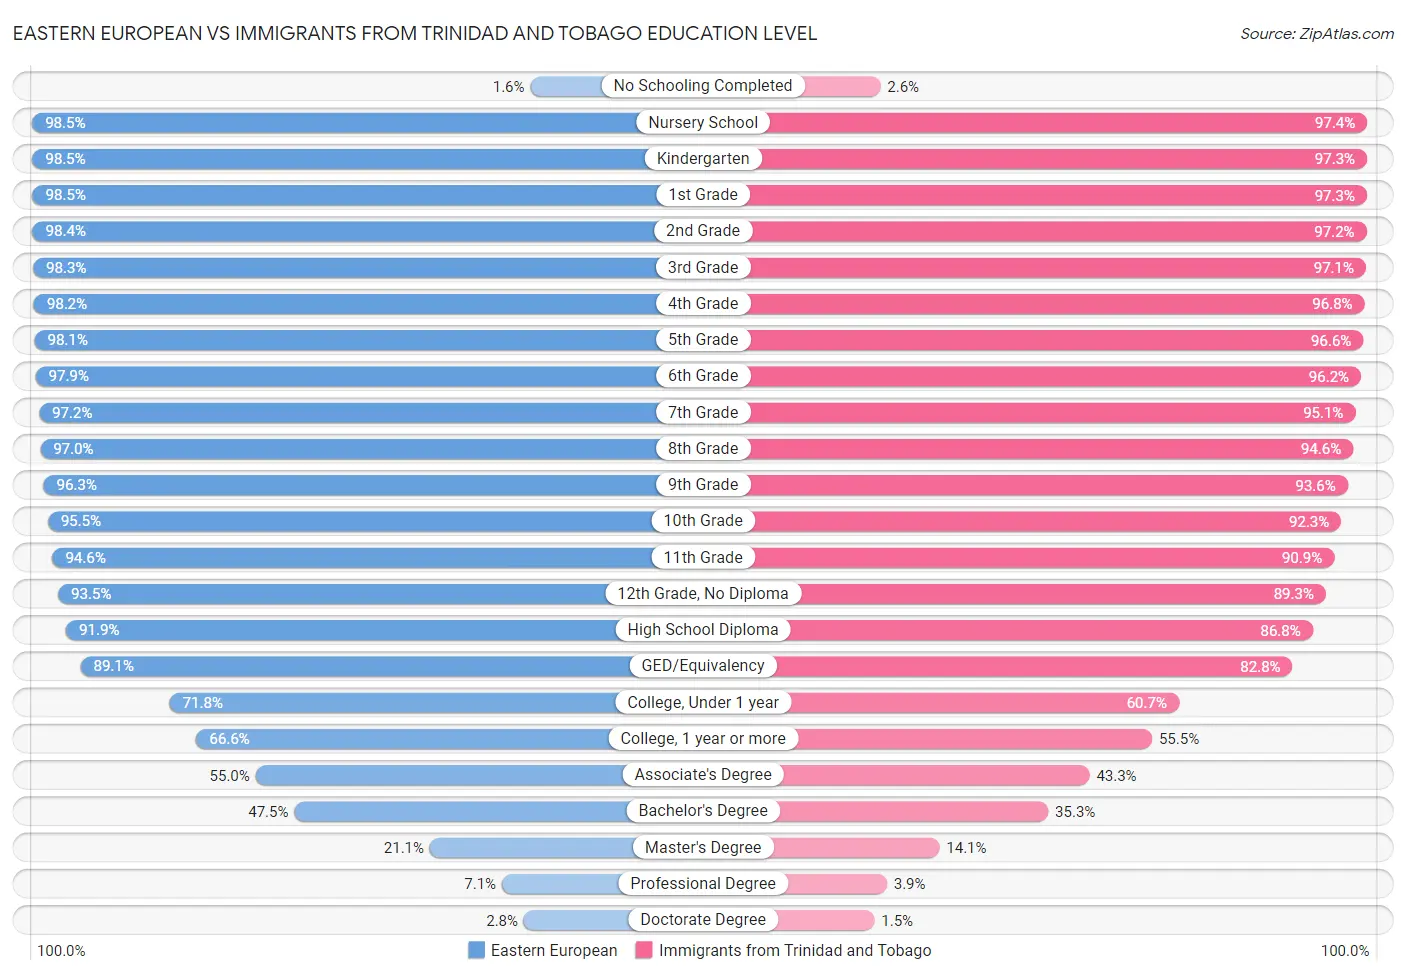 Eastern European vs Immigrants from Trinidad and Tobago Education Level